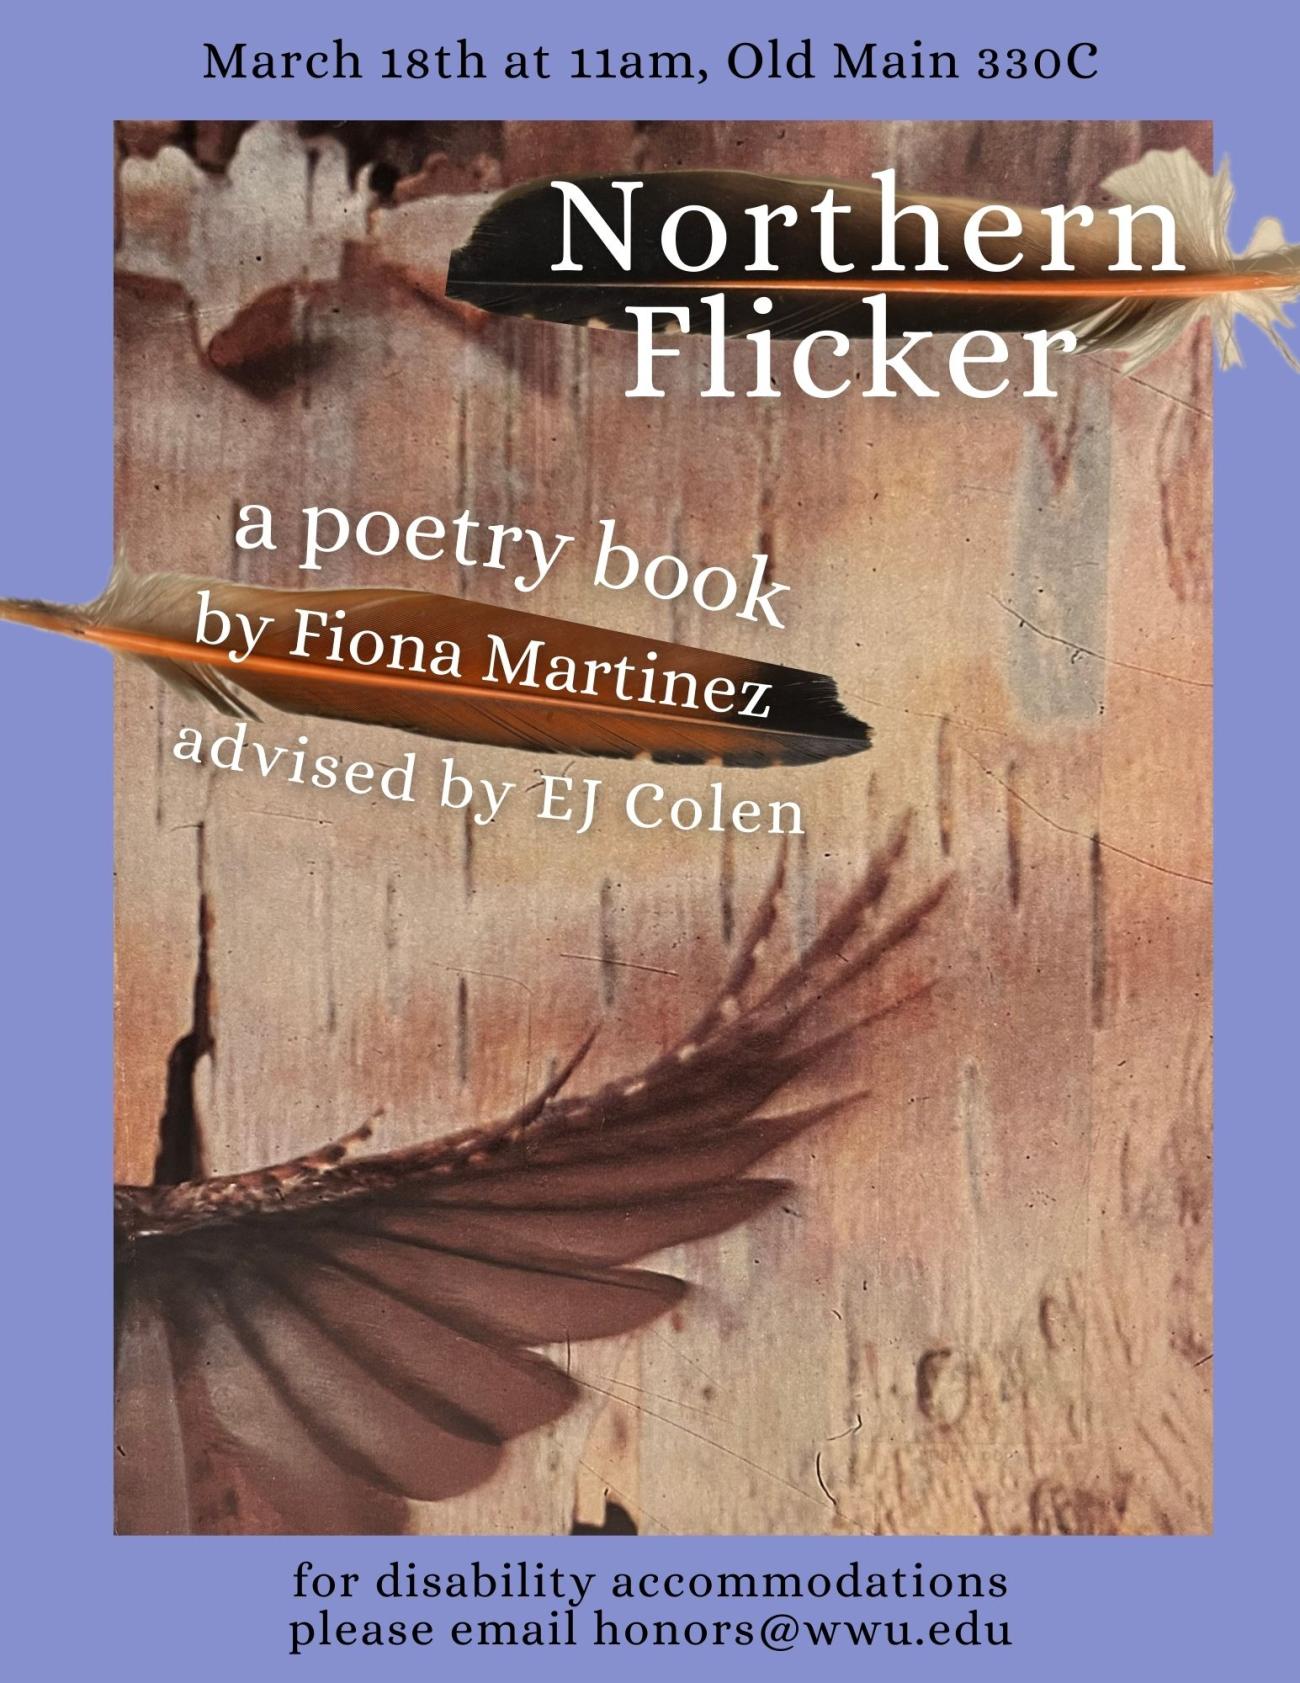 A blue border around a brown tree bark image with orange feathers and a brown bird wing in motion. The text reads “Northern Flicker. A poetry book by Fiona Martinez. Advised by EJ Colen. March 18th at 11am, Old Main 330C. For disability accommodations please email honors@wwu.edu.